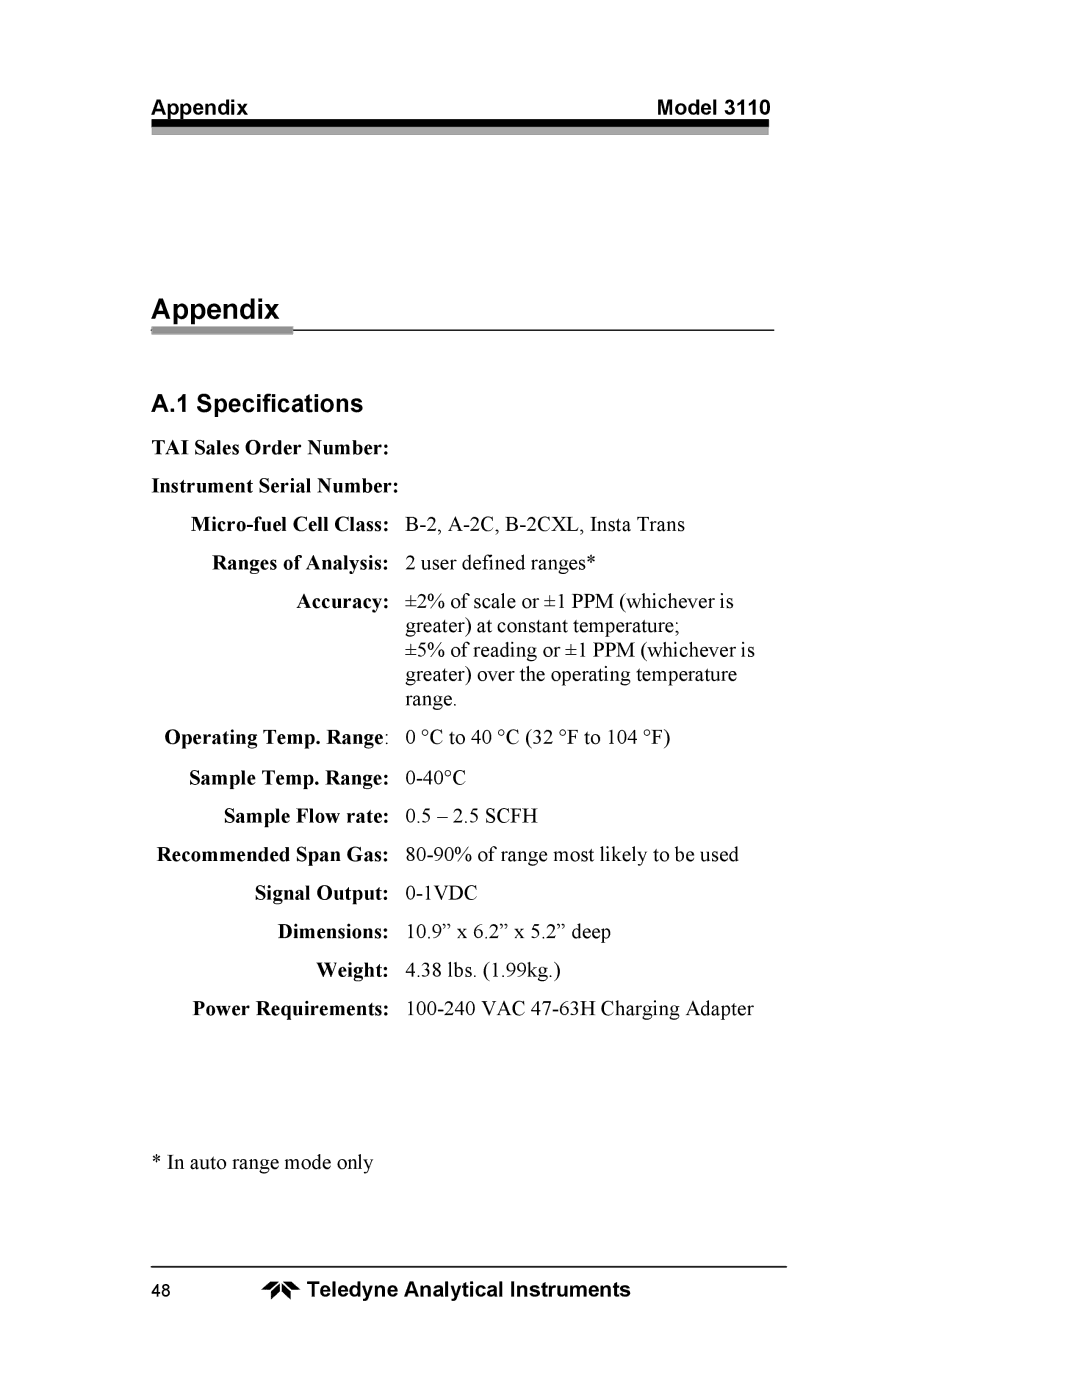 Teledyne 3110 operating instructions Specifications, Appendix Model 